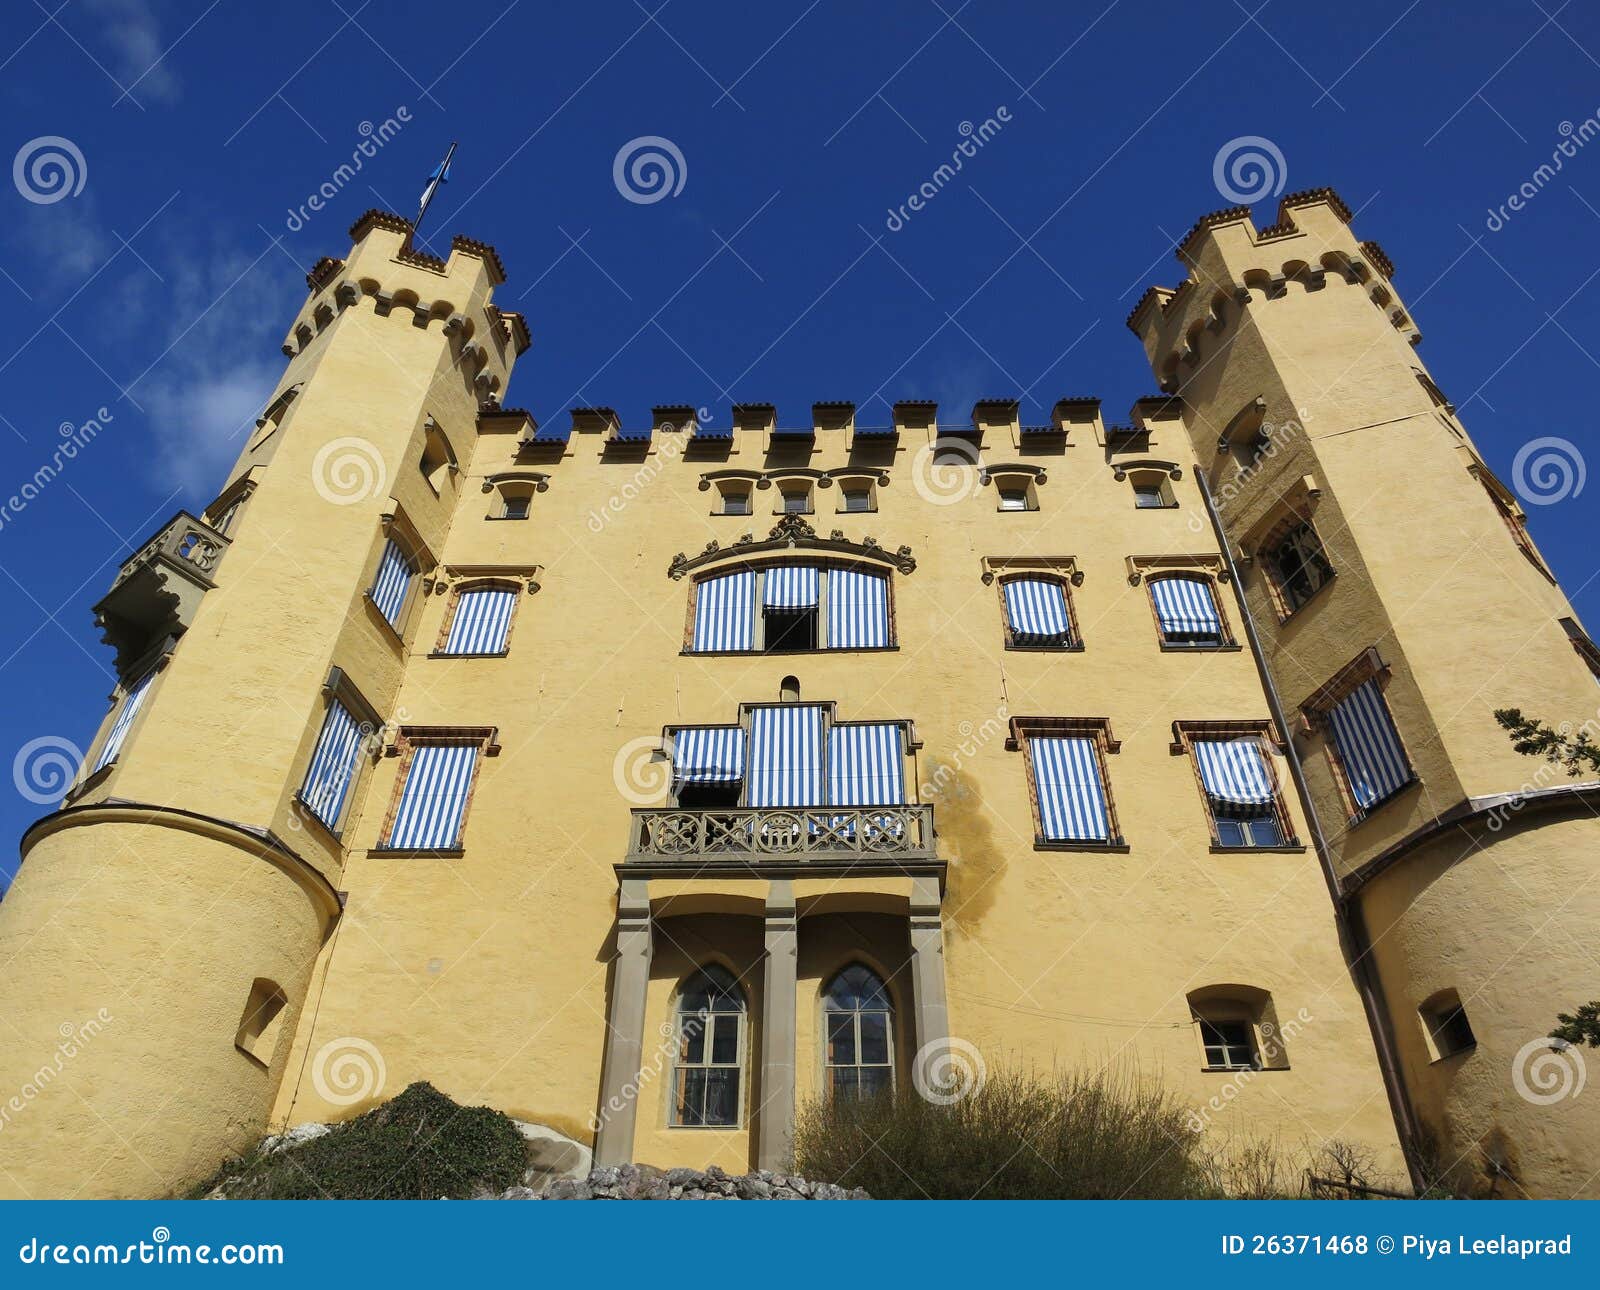 Front view of the Grand Hohenschwangau Castle. Closeup view of the famous Hohenschwangau Castle of Bavaria, Germany.